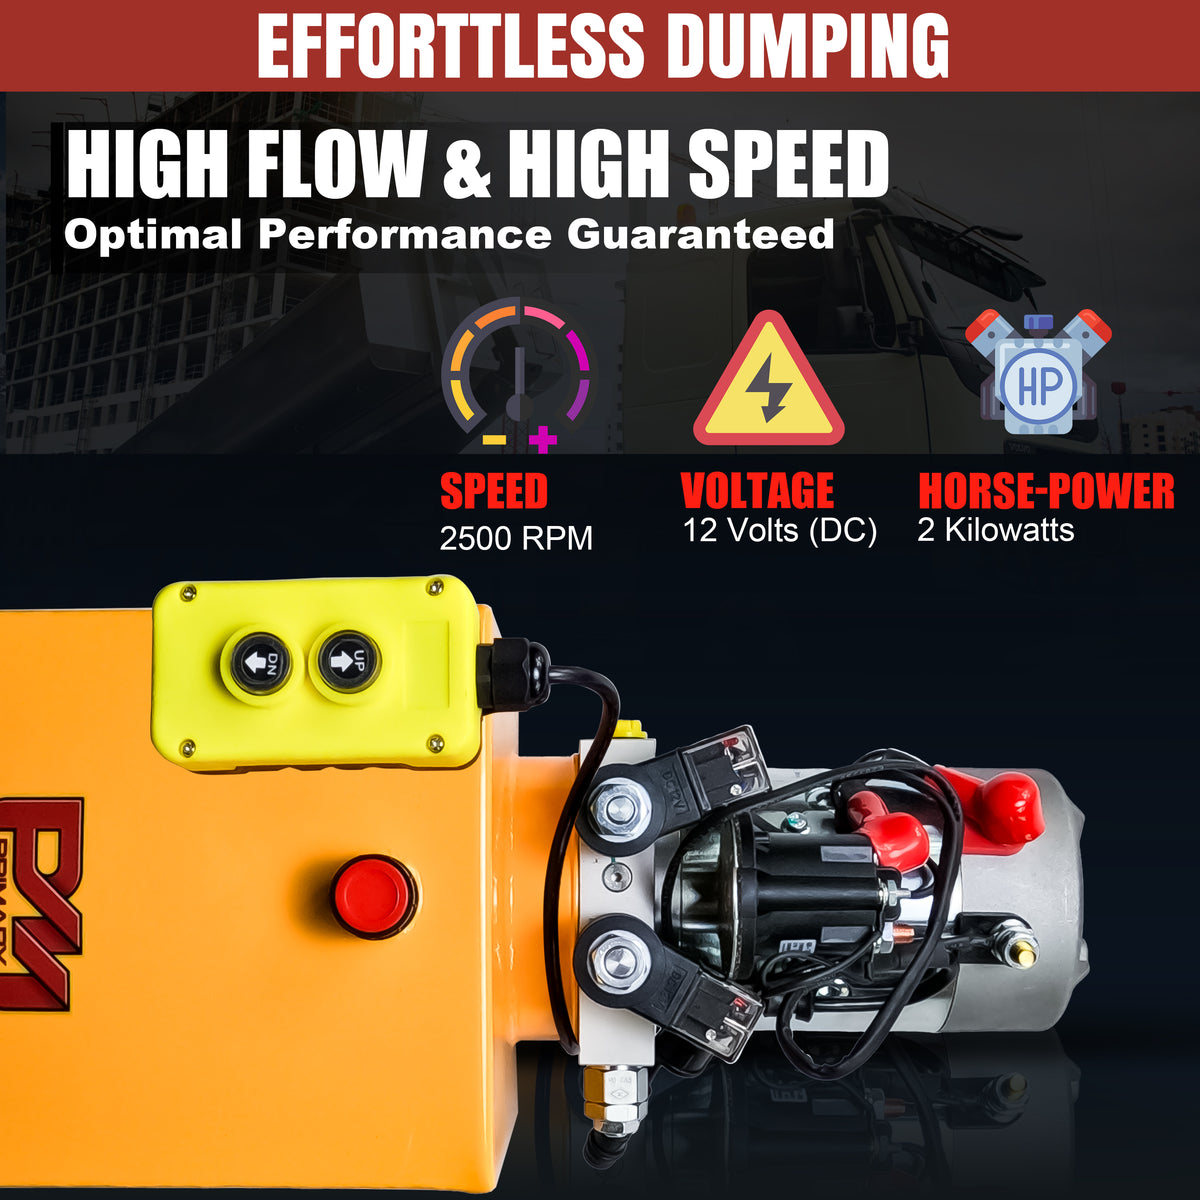 Primary Mover Double Acting 12VDC Hydraulic Power Unit with Steel Reservoirs, featuring dual-acting precision, tailored for dump bed systems, and crafted for durability and value.